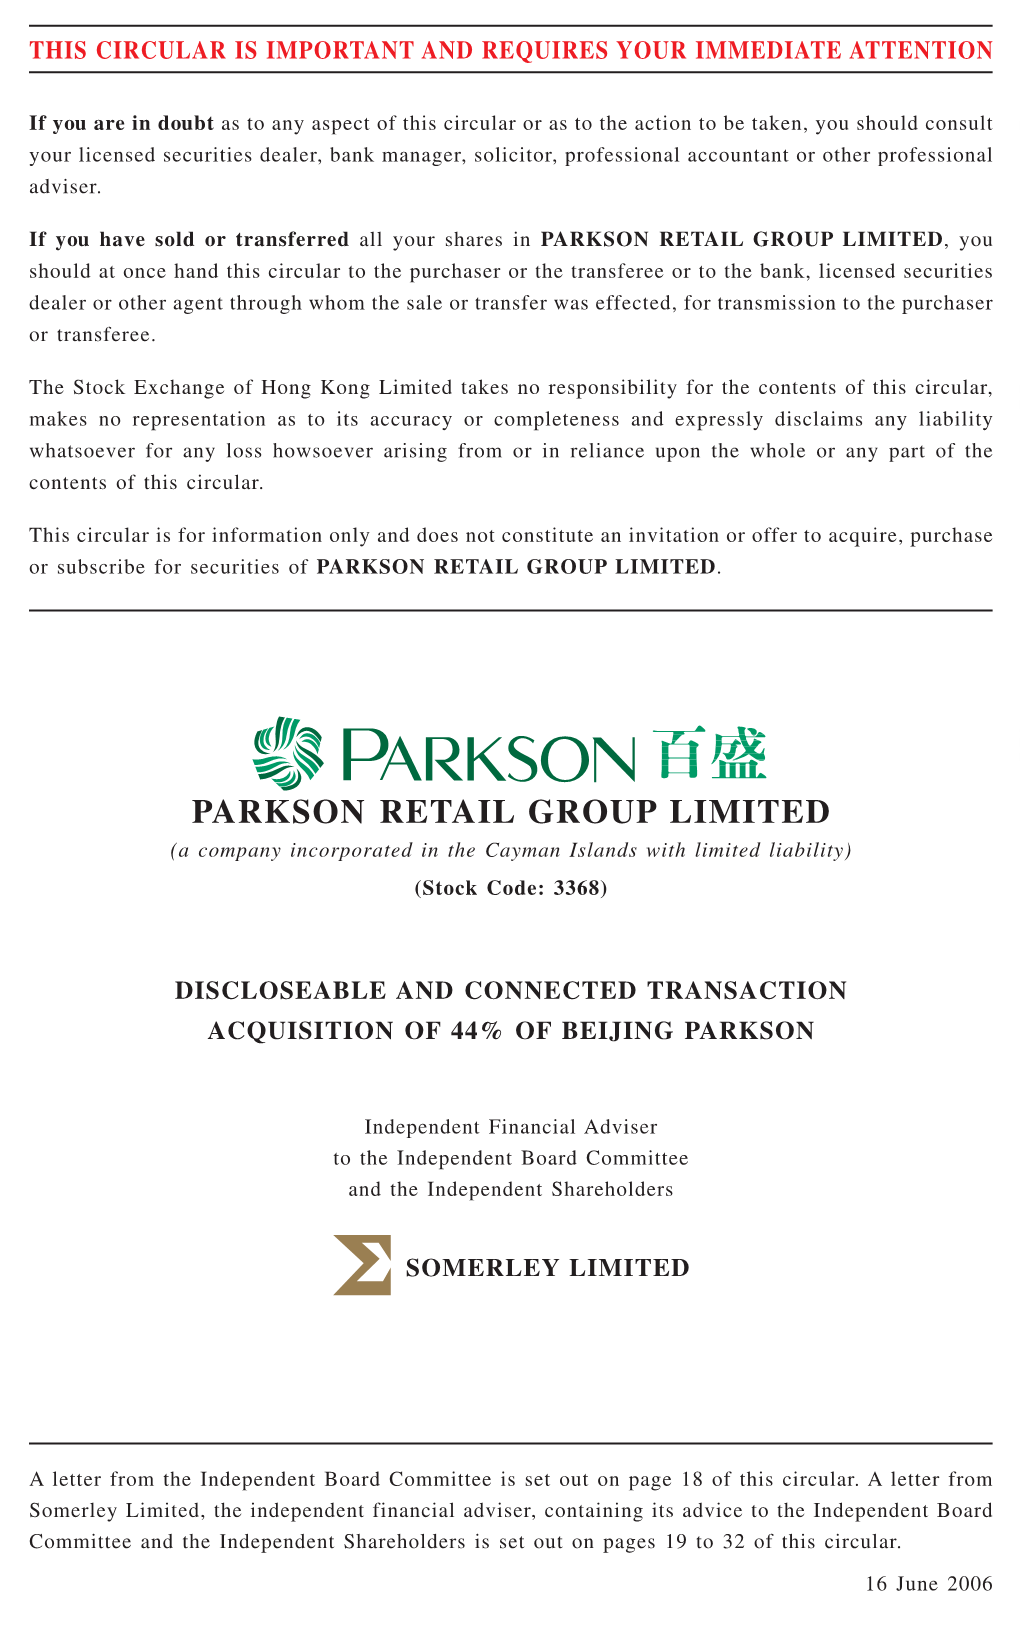 Parkson Retail Group Limited